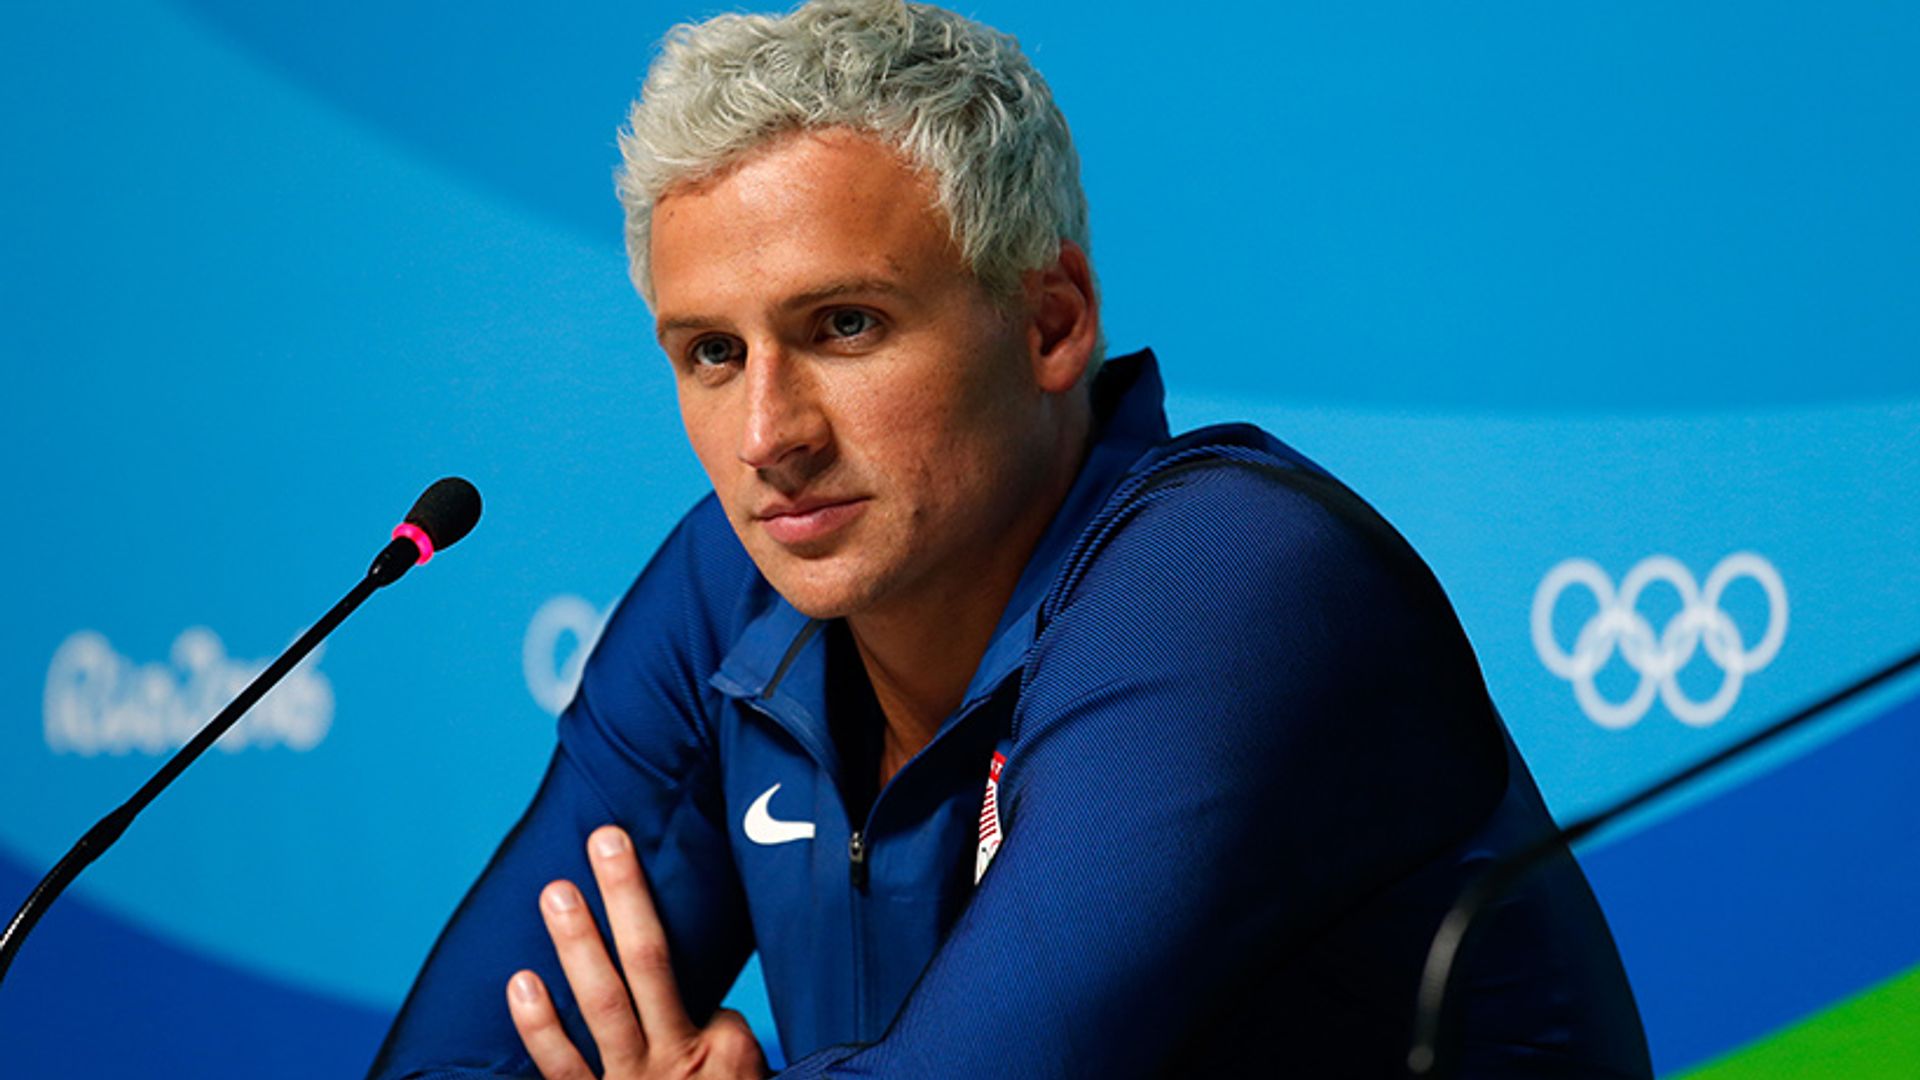 Ryan Lochte and teammates will face punishment over Rio robbery scandal